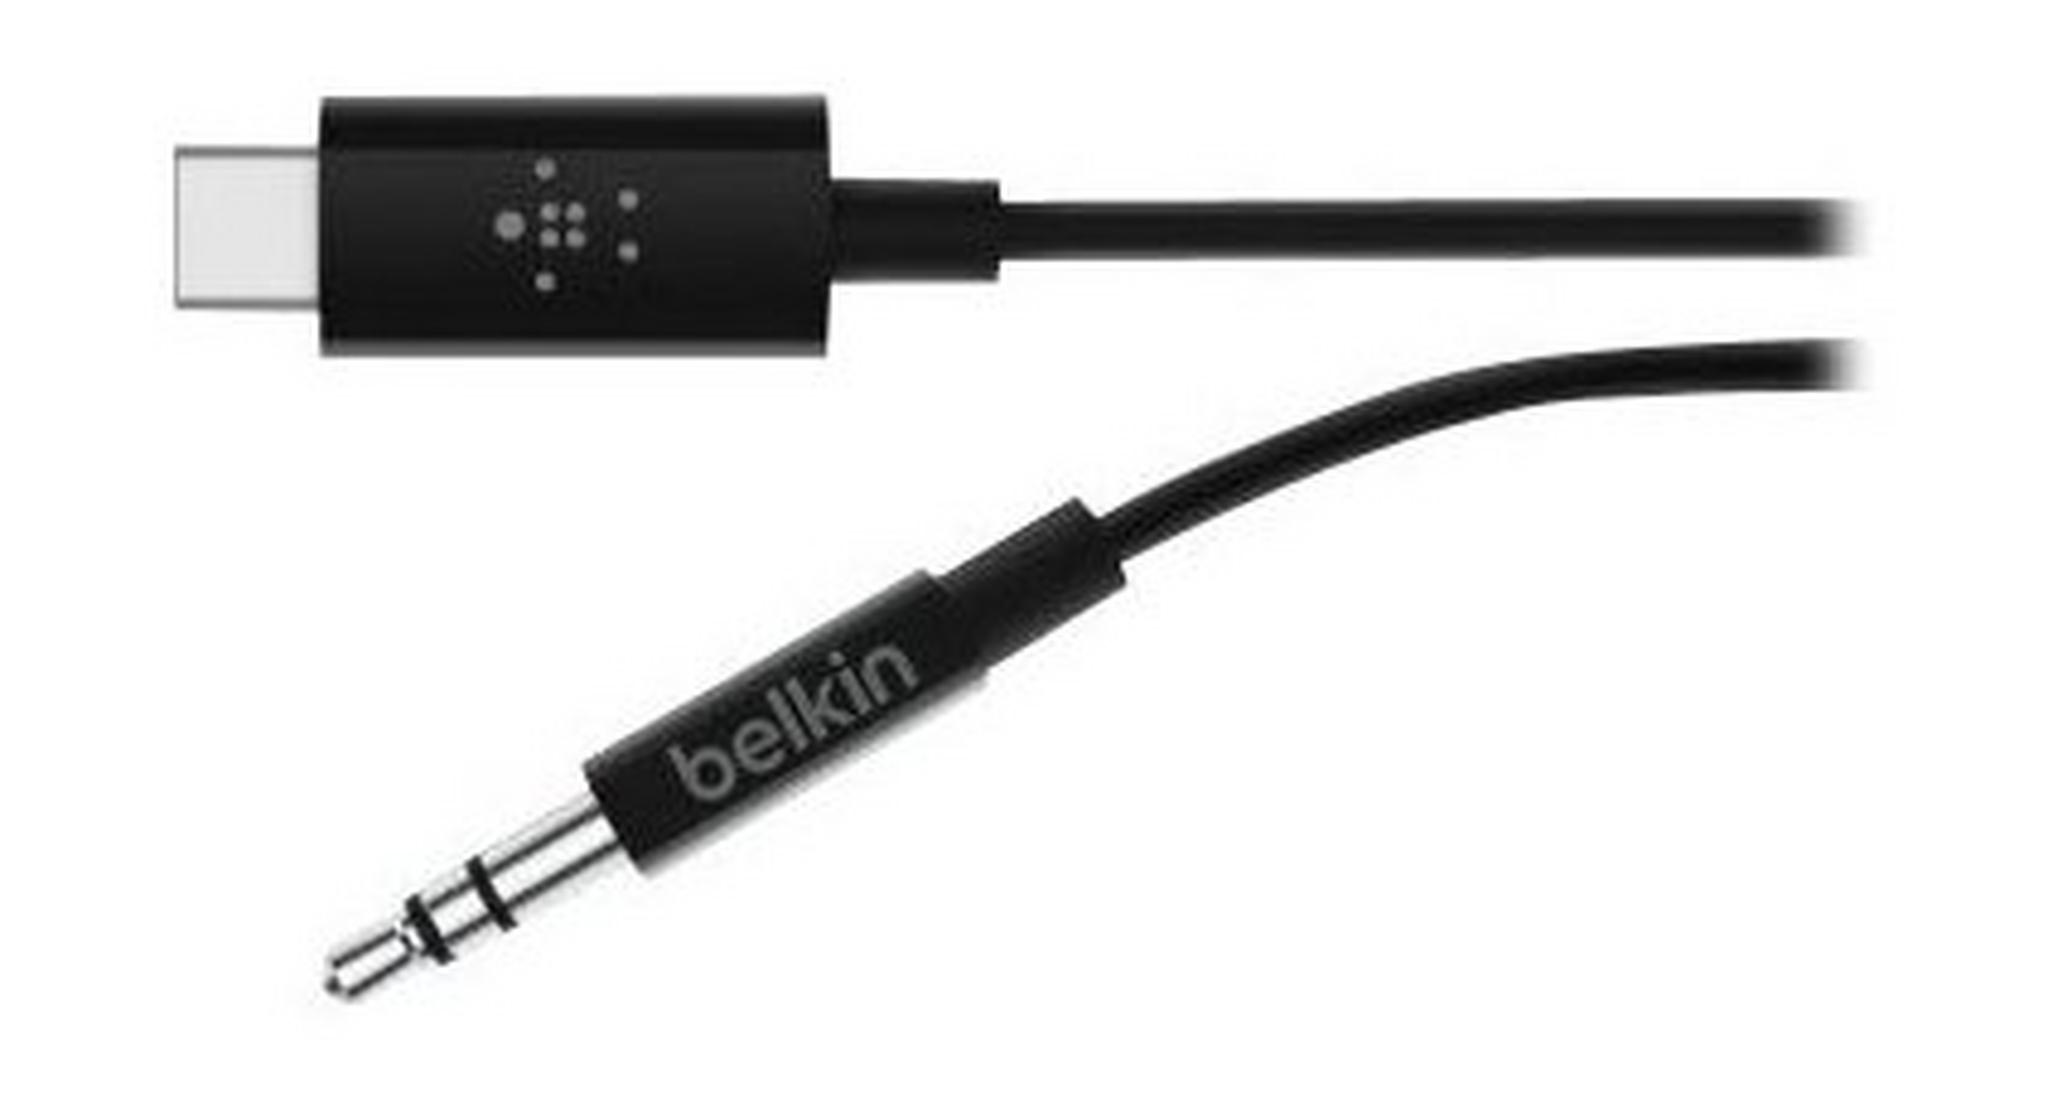 Belkin USB-C to 3.5mm 6ft Audio Cable - Black